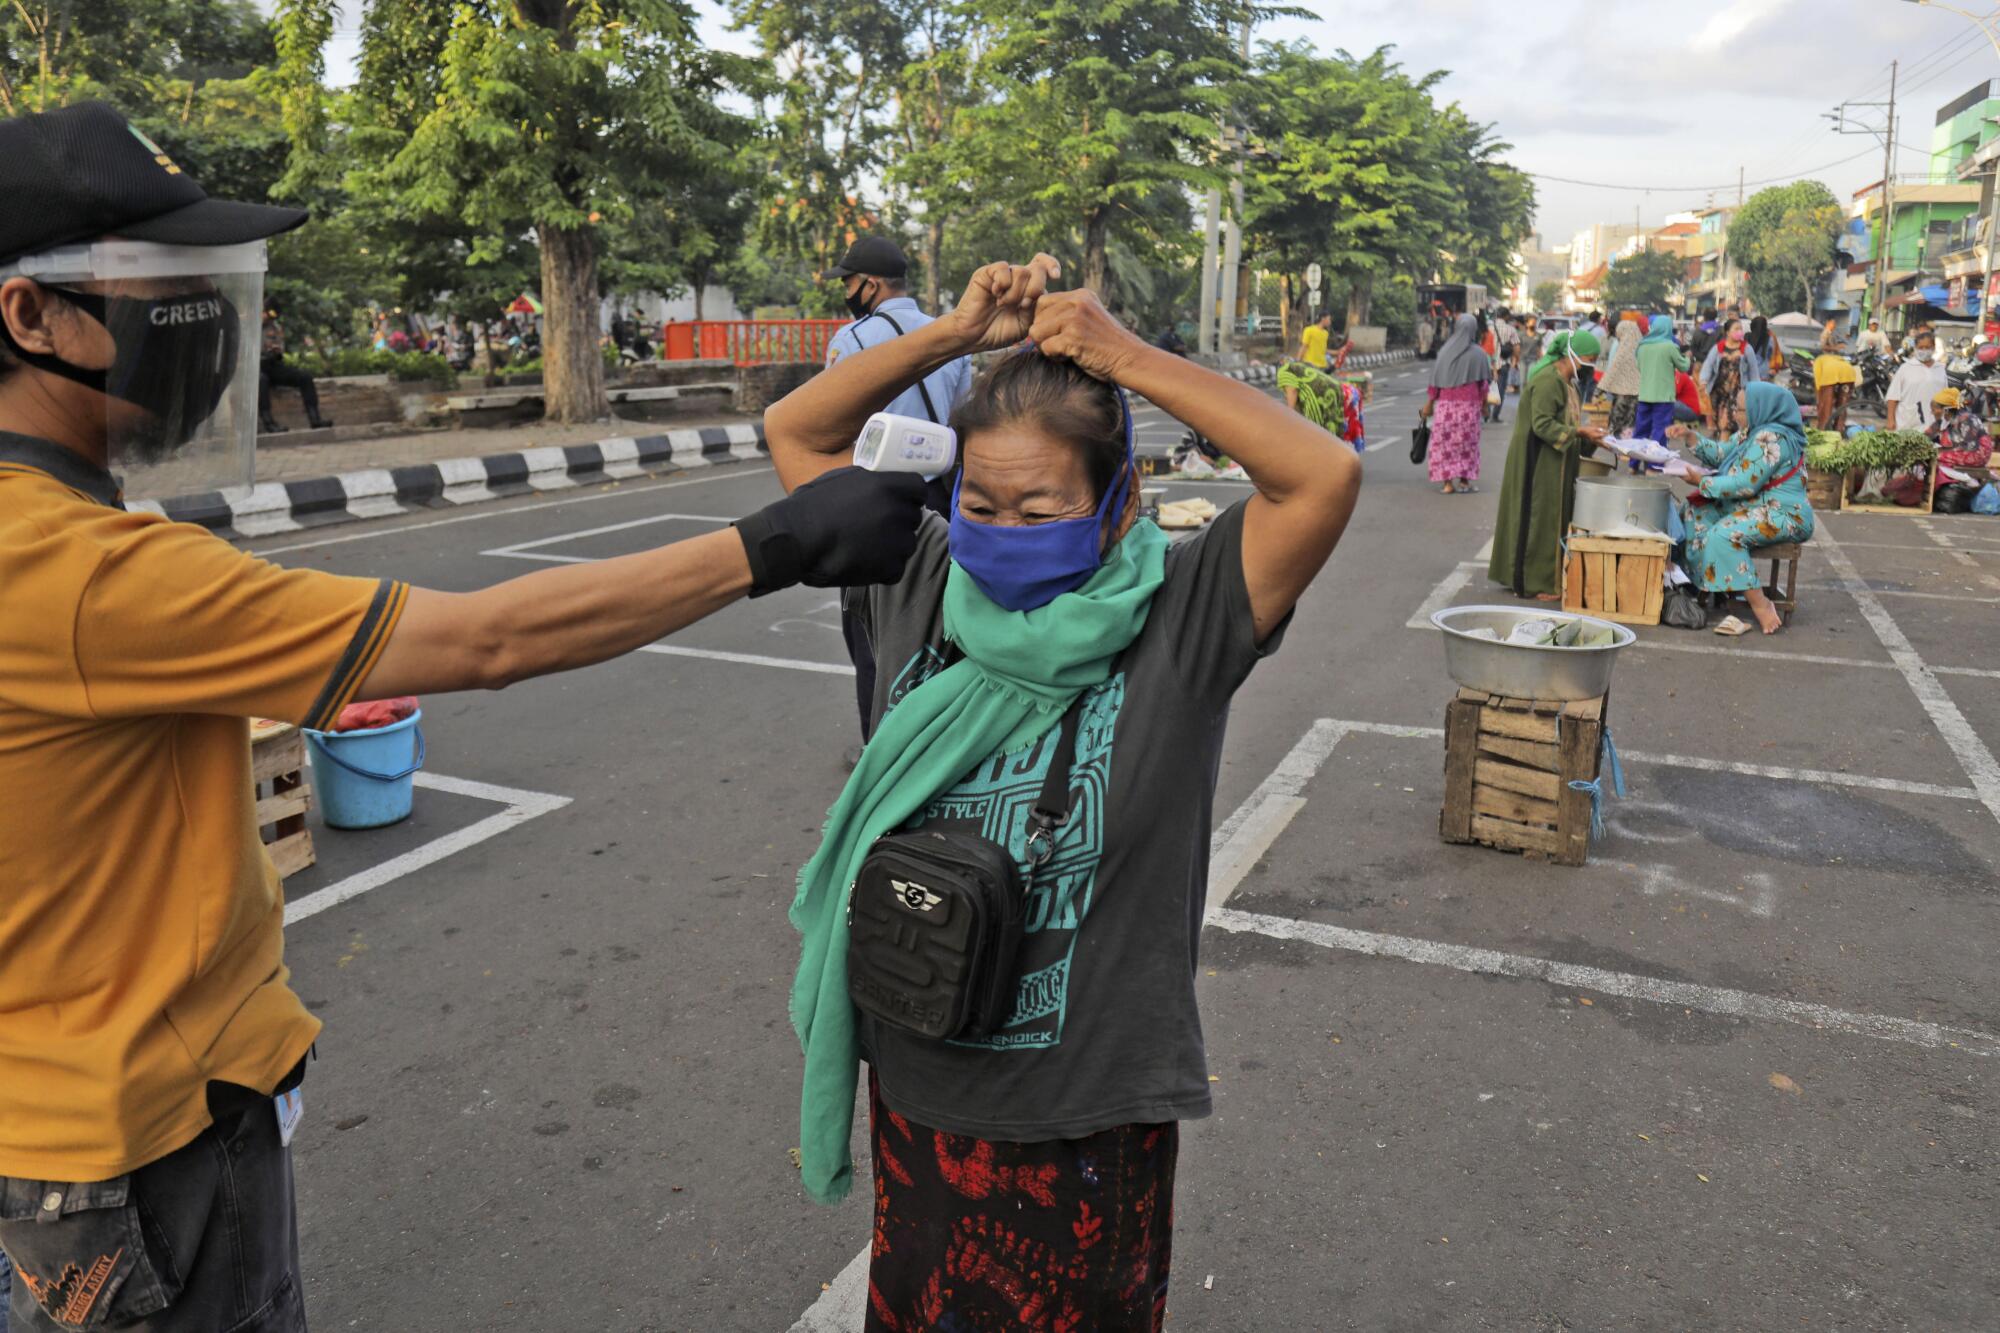 A city official takes the temperature of a vendor at a market in Surabaya, Indonesia.